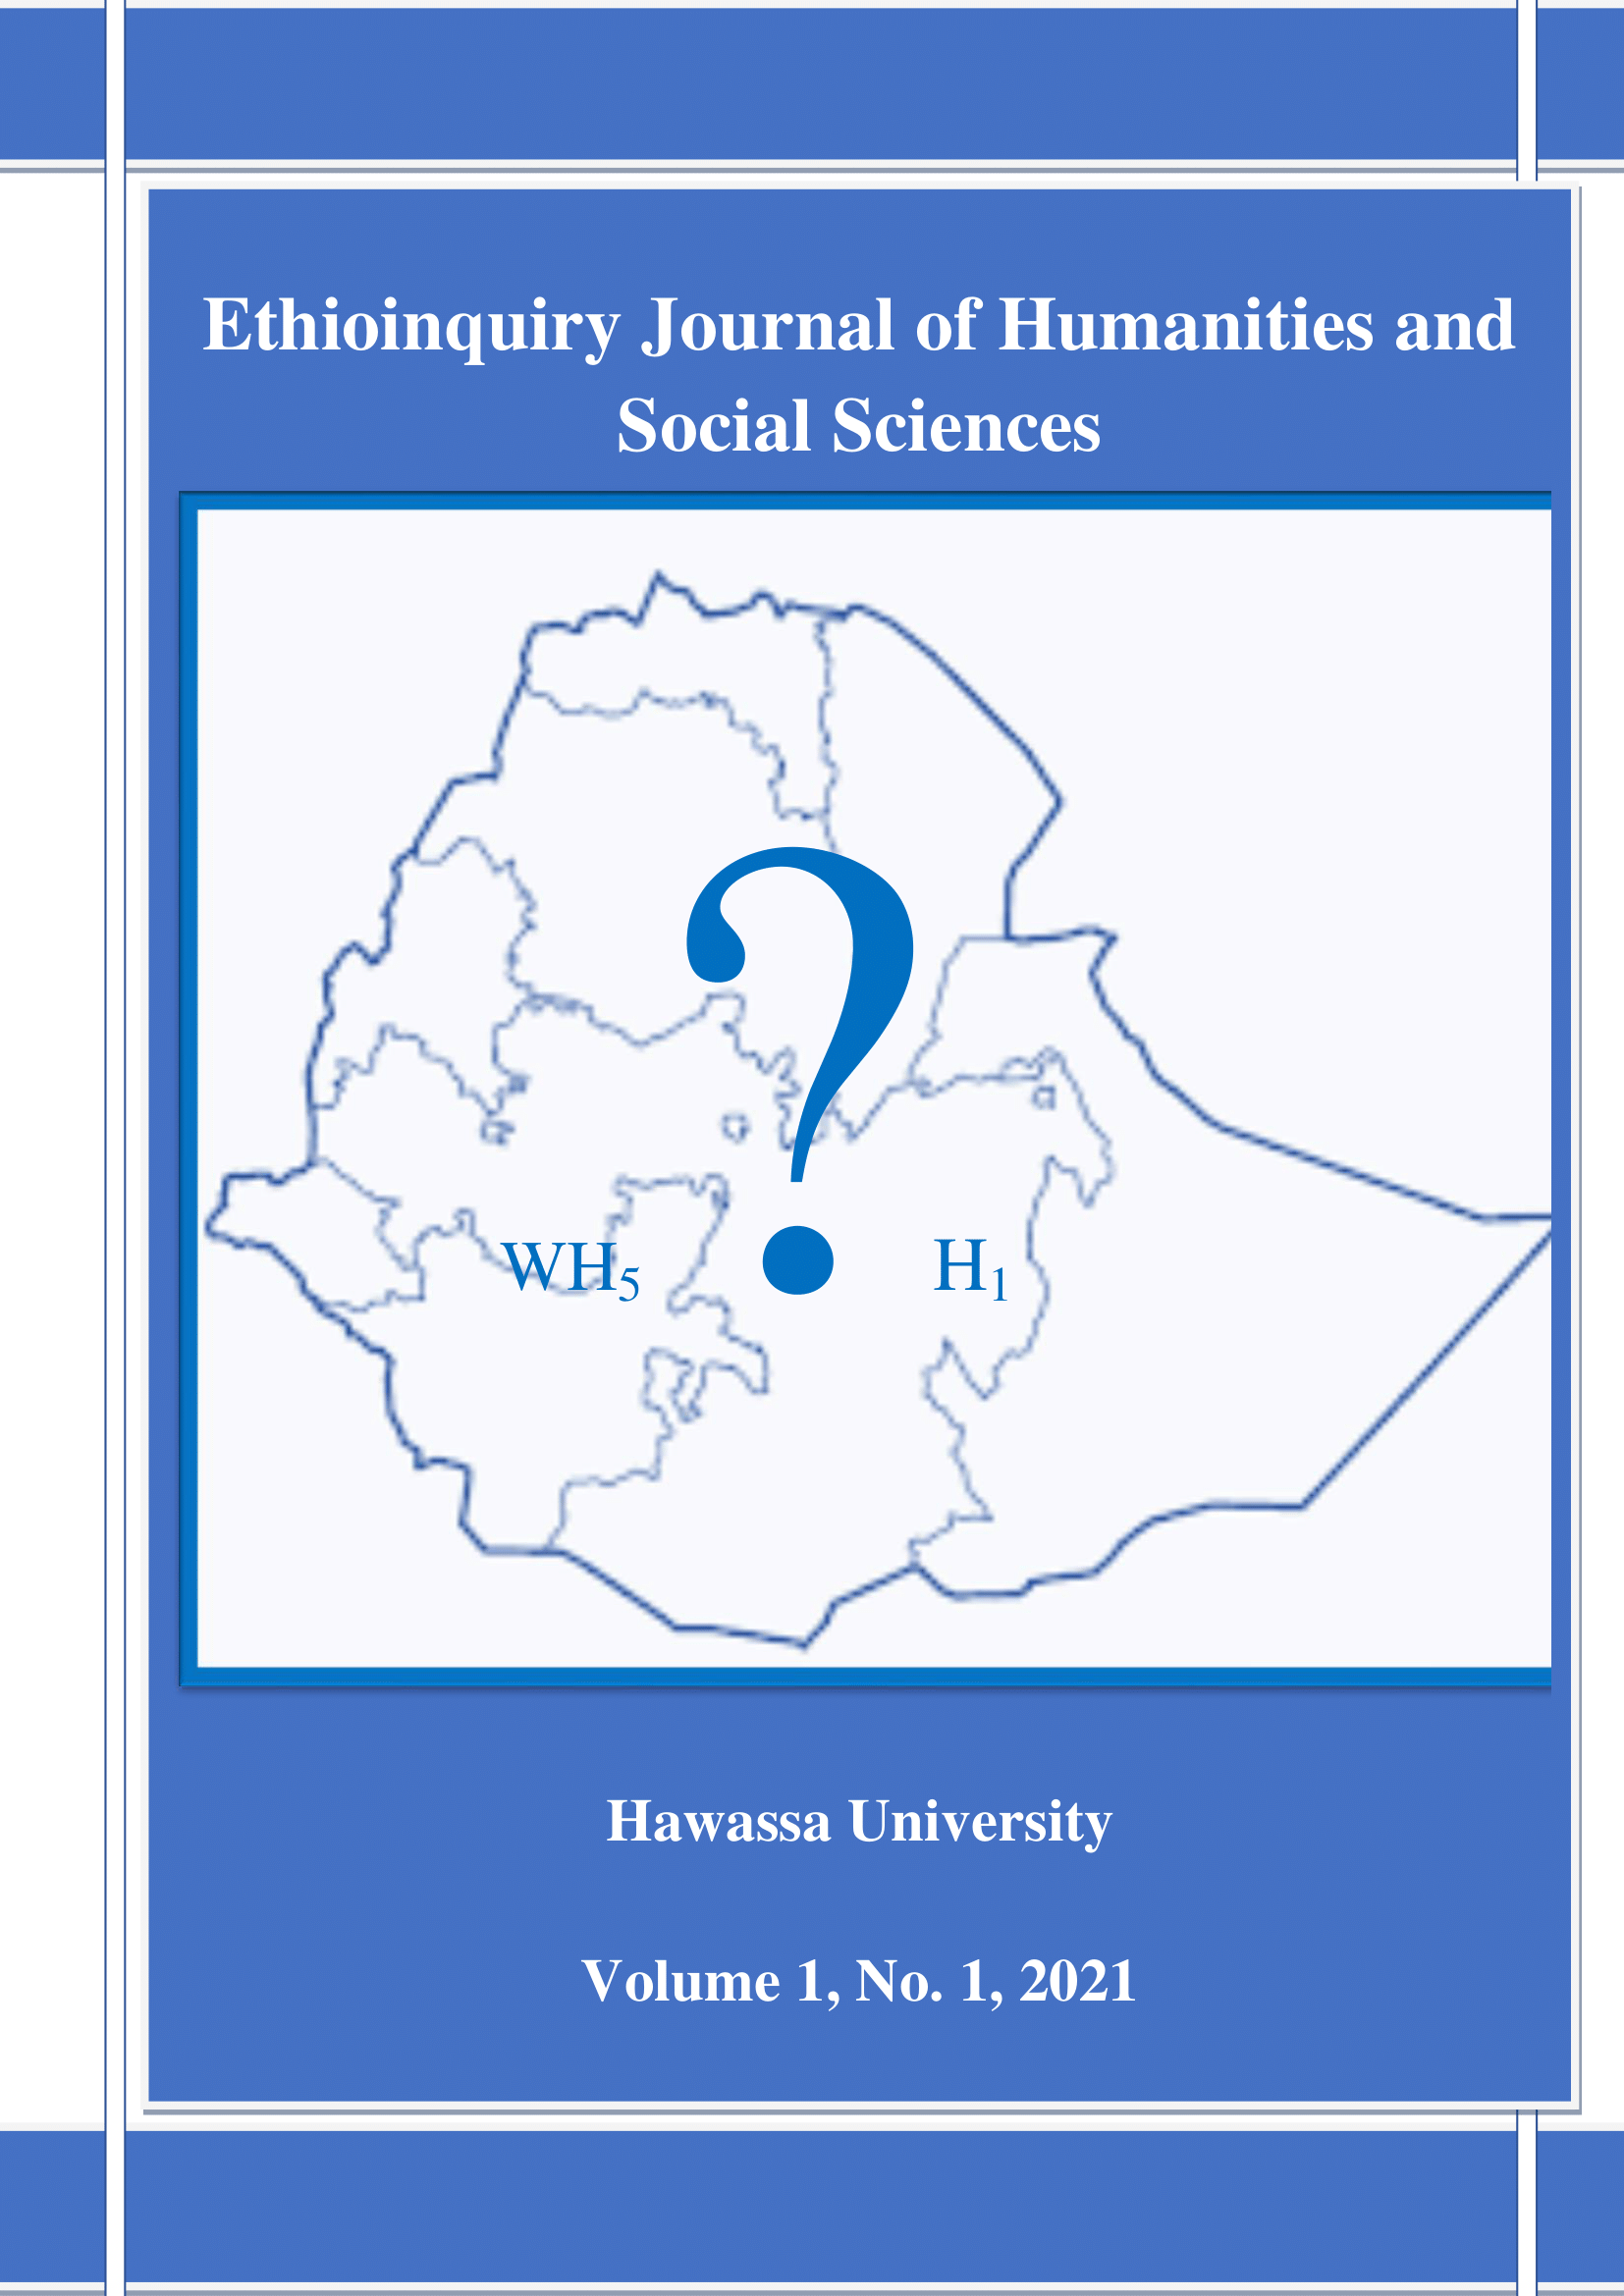 					View Vol. 1 No. 1 (2021): Ethioinquiry Journal of Humanities and Social Sciences
				